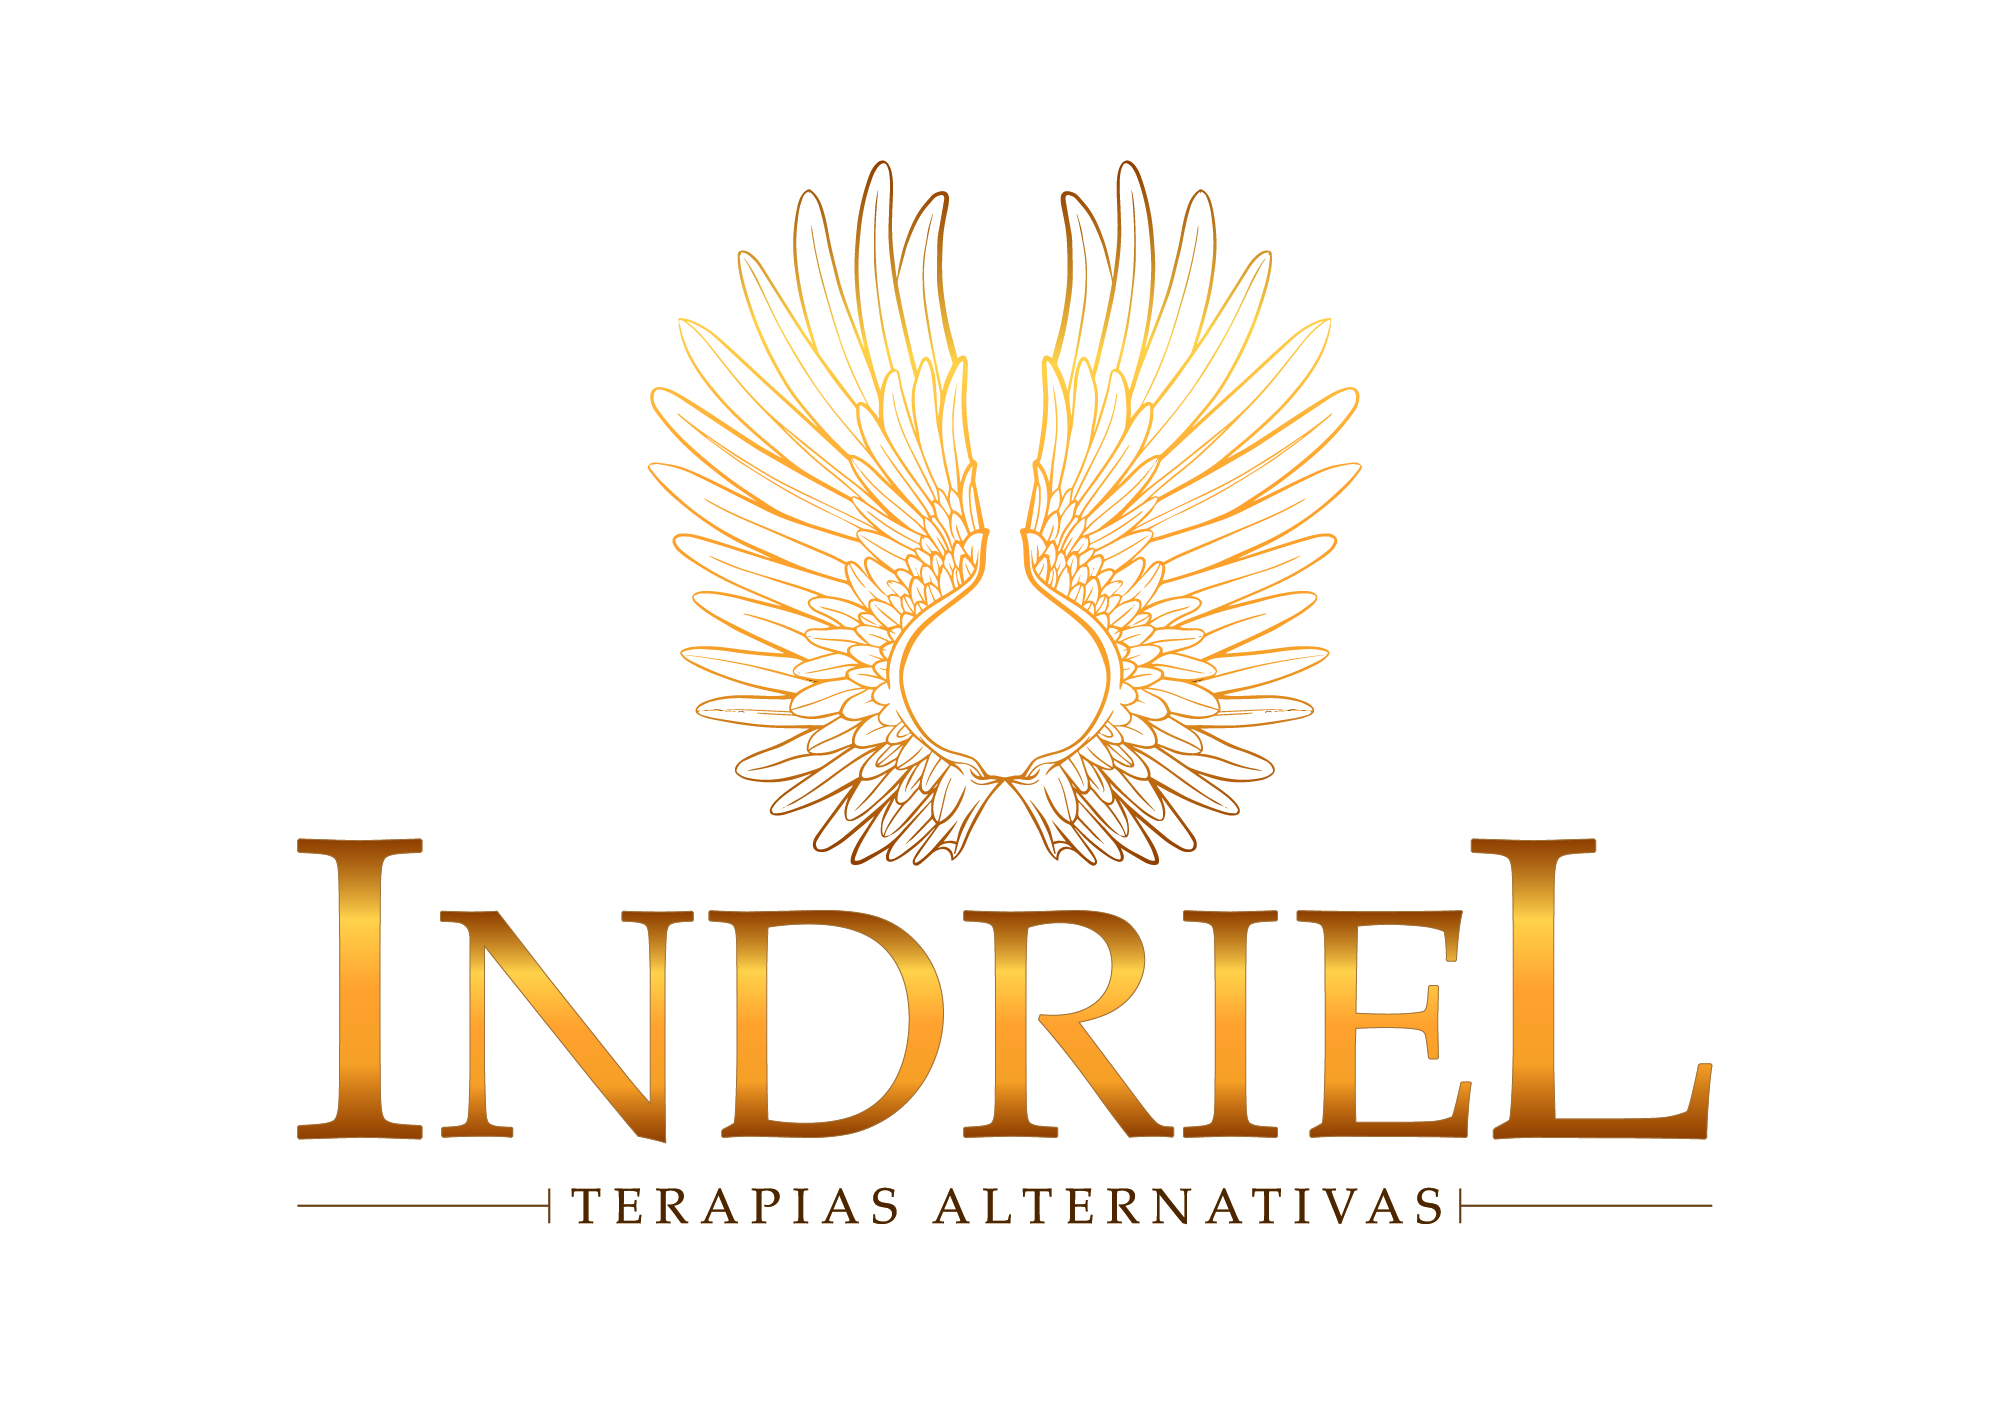 Indriel